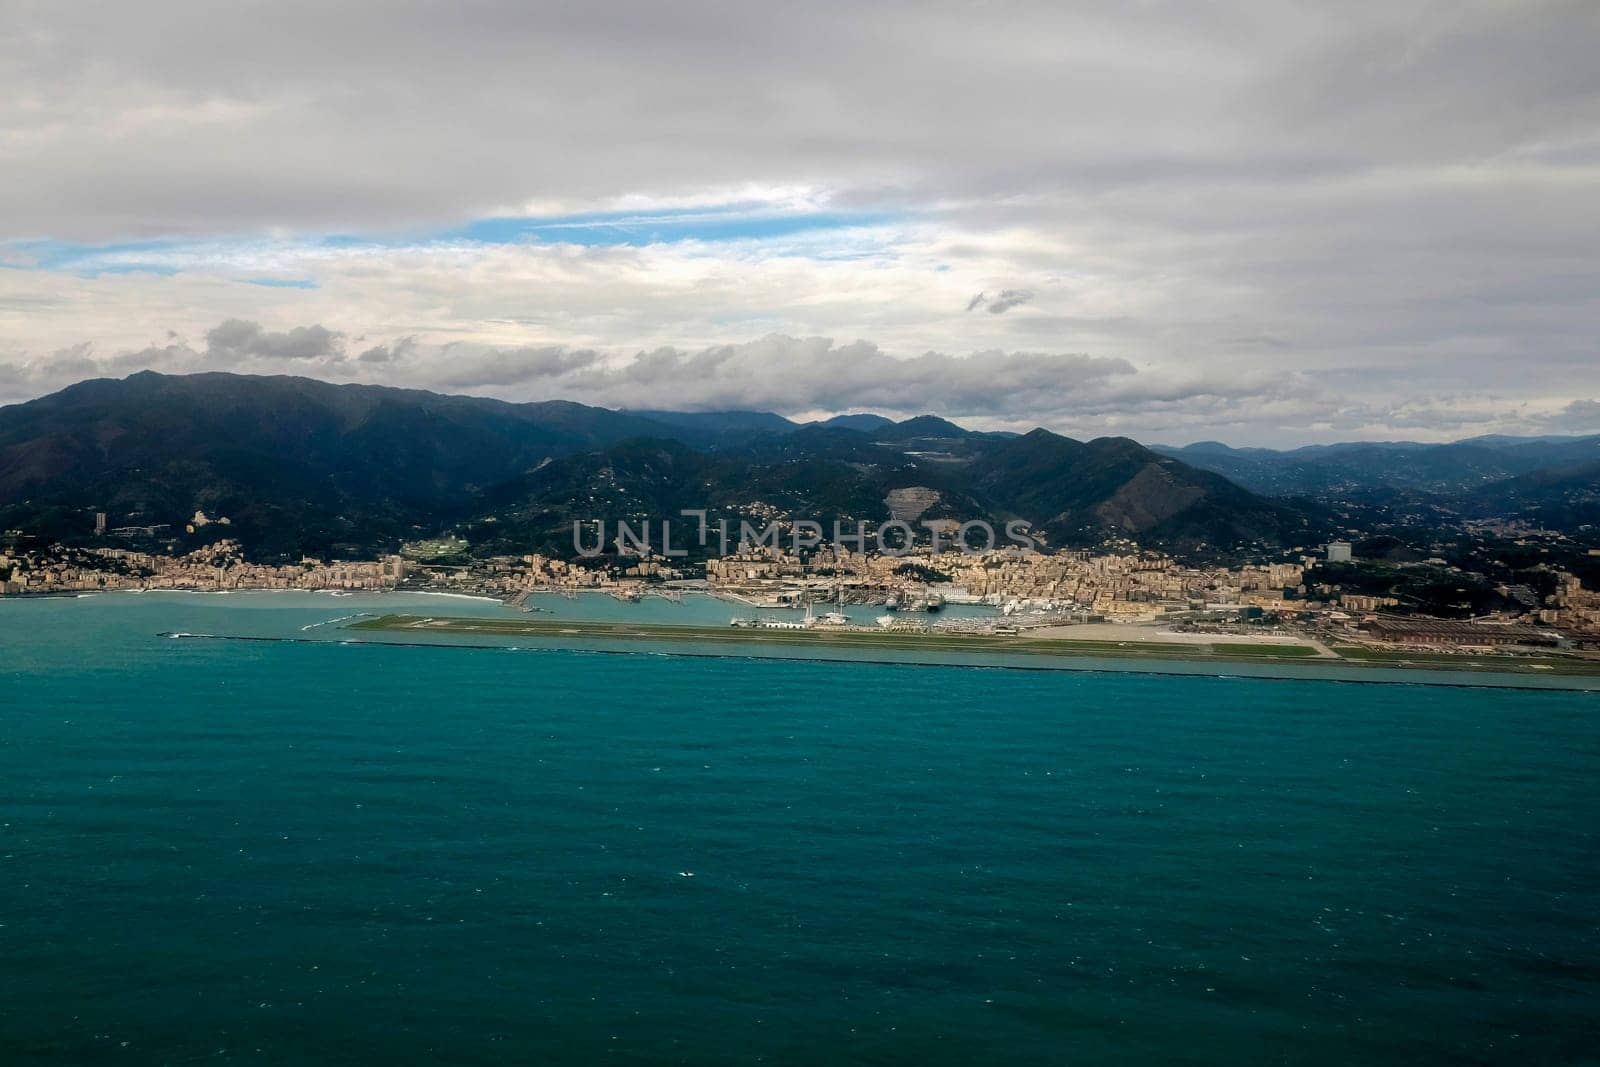 Airport of Genoa aerial view before landing to airport by airplane during a sea storm tempest hurricane by AndreaIzzotti